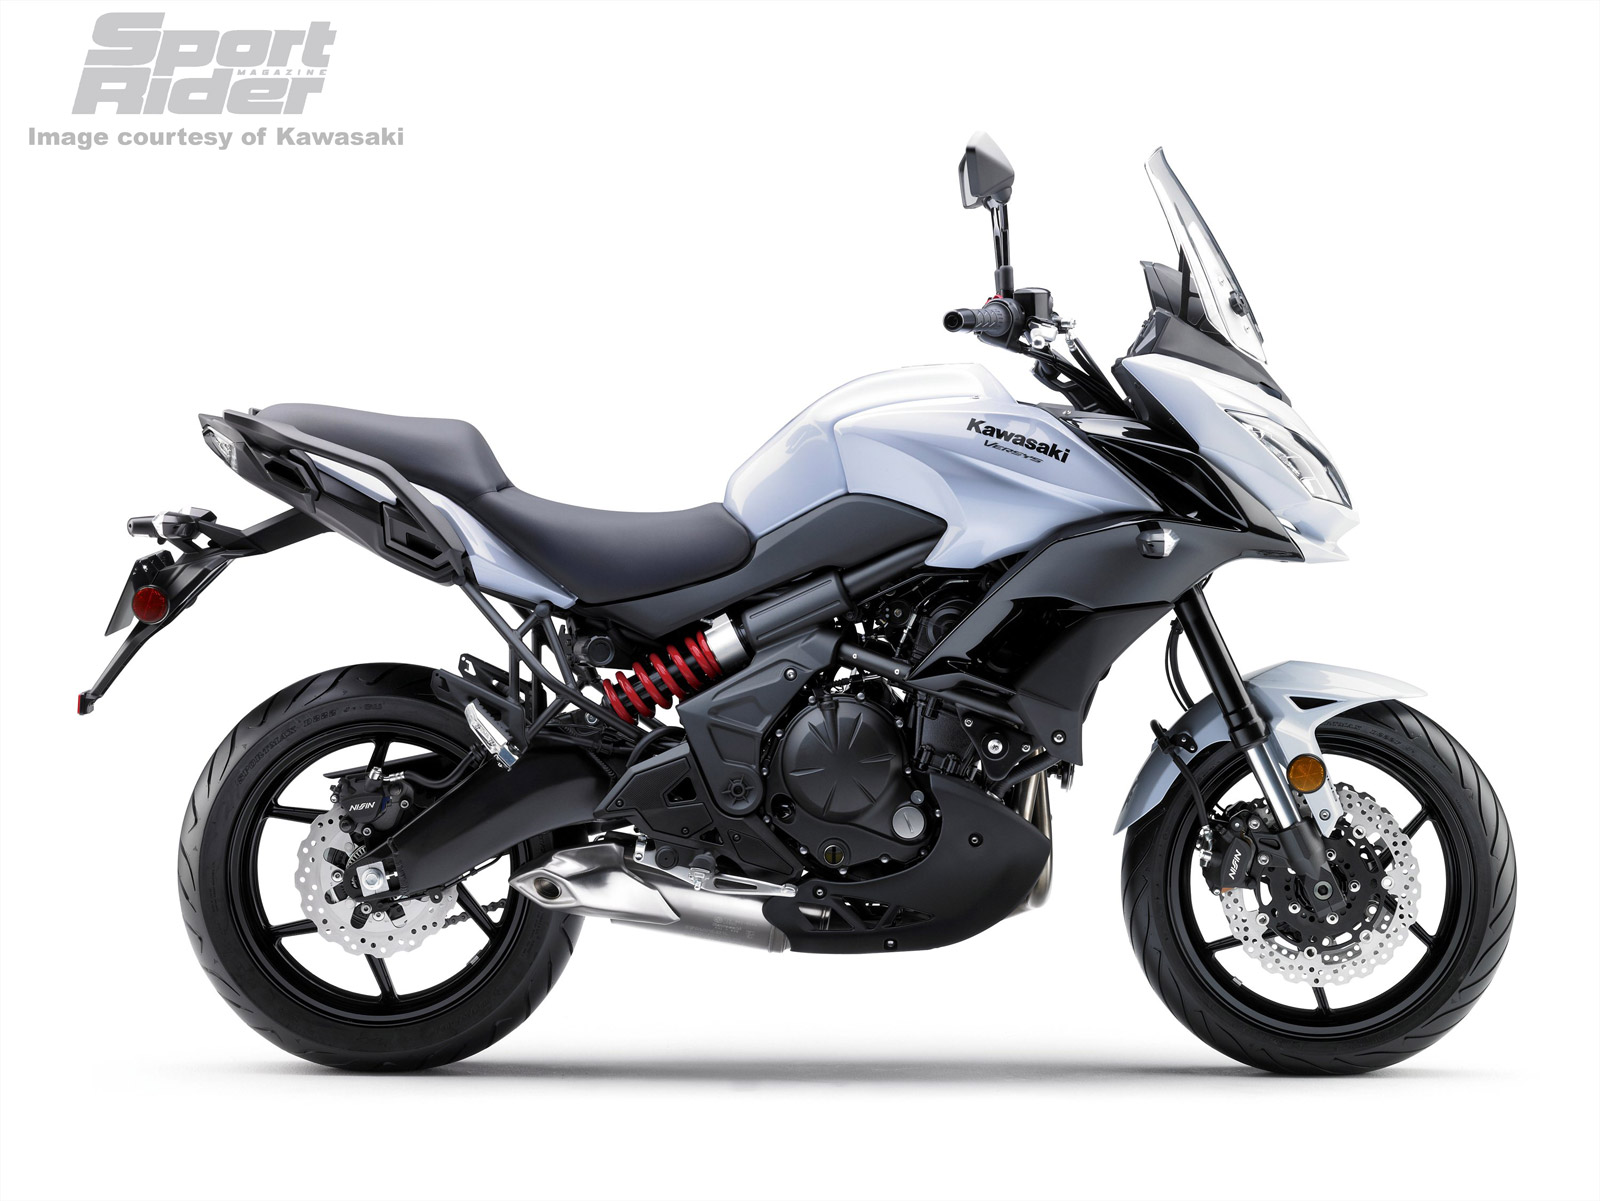 At sige sandheden tragt Formålet 2015 Kawasaki Versys 650 ABS and Versys 650 LT First Look | Cycle World